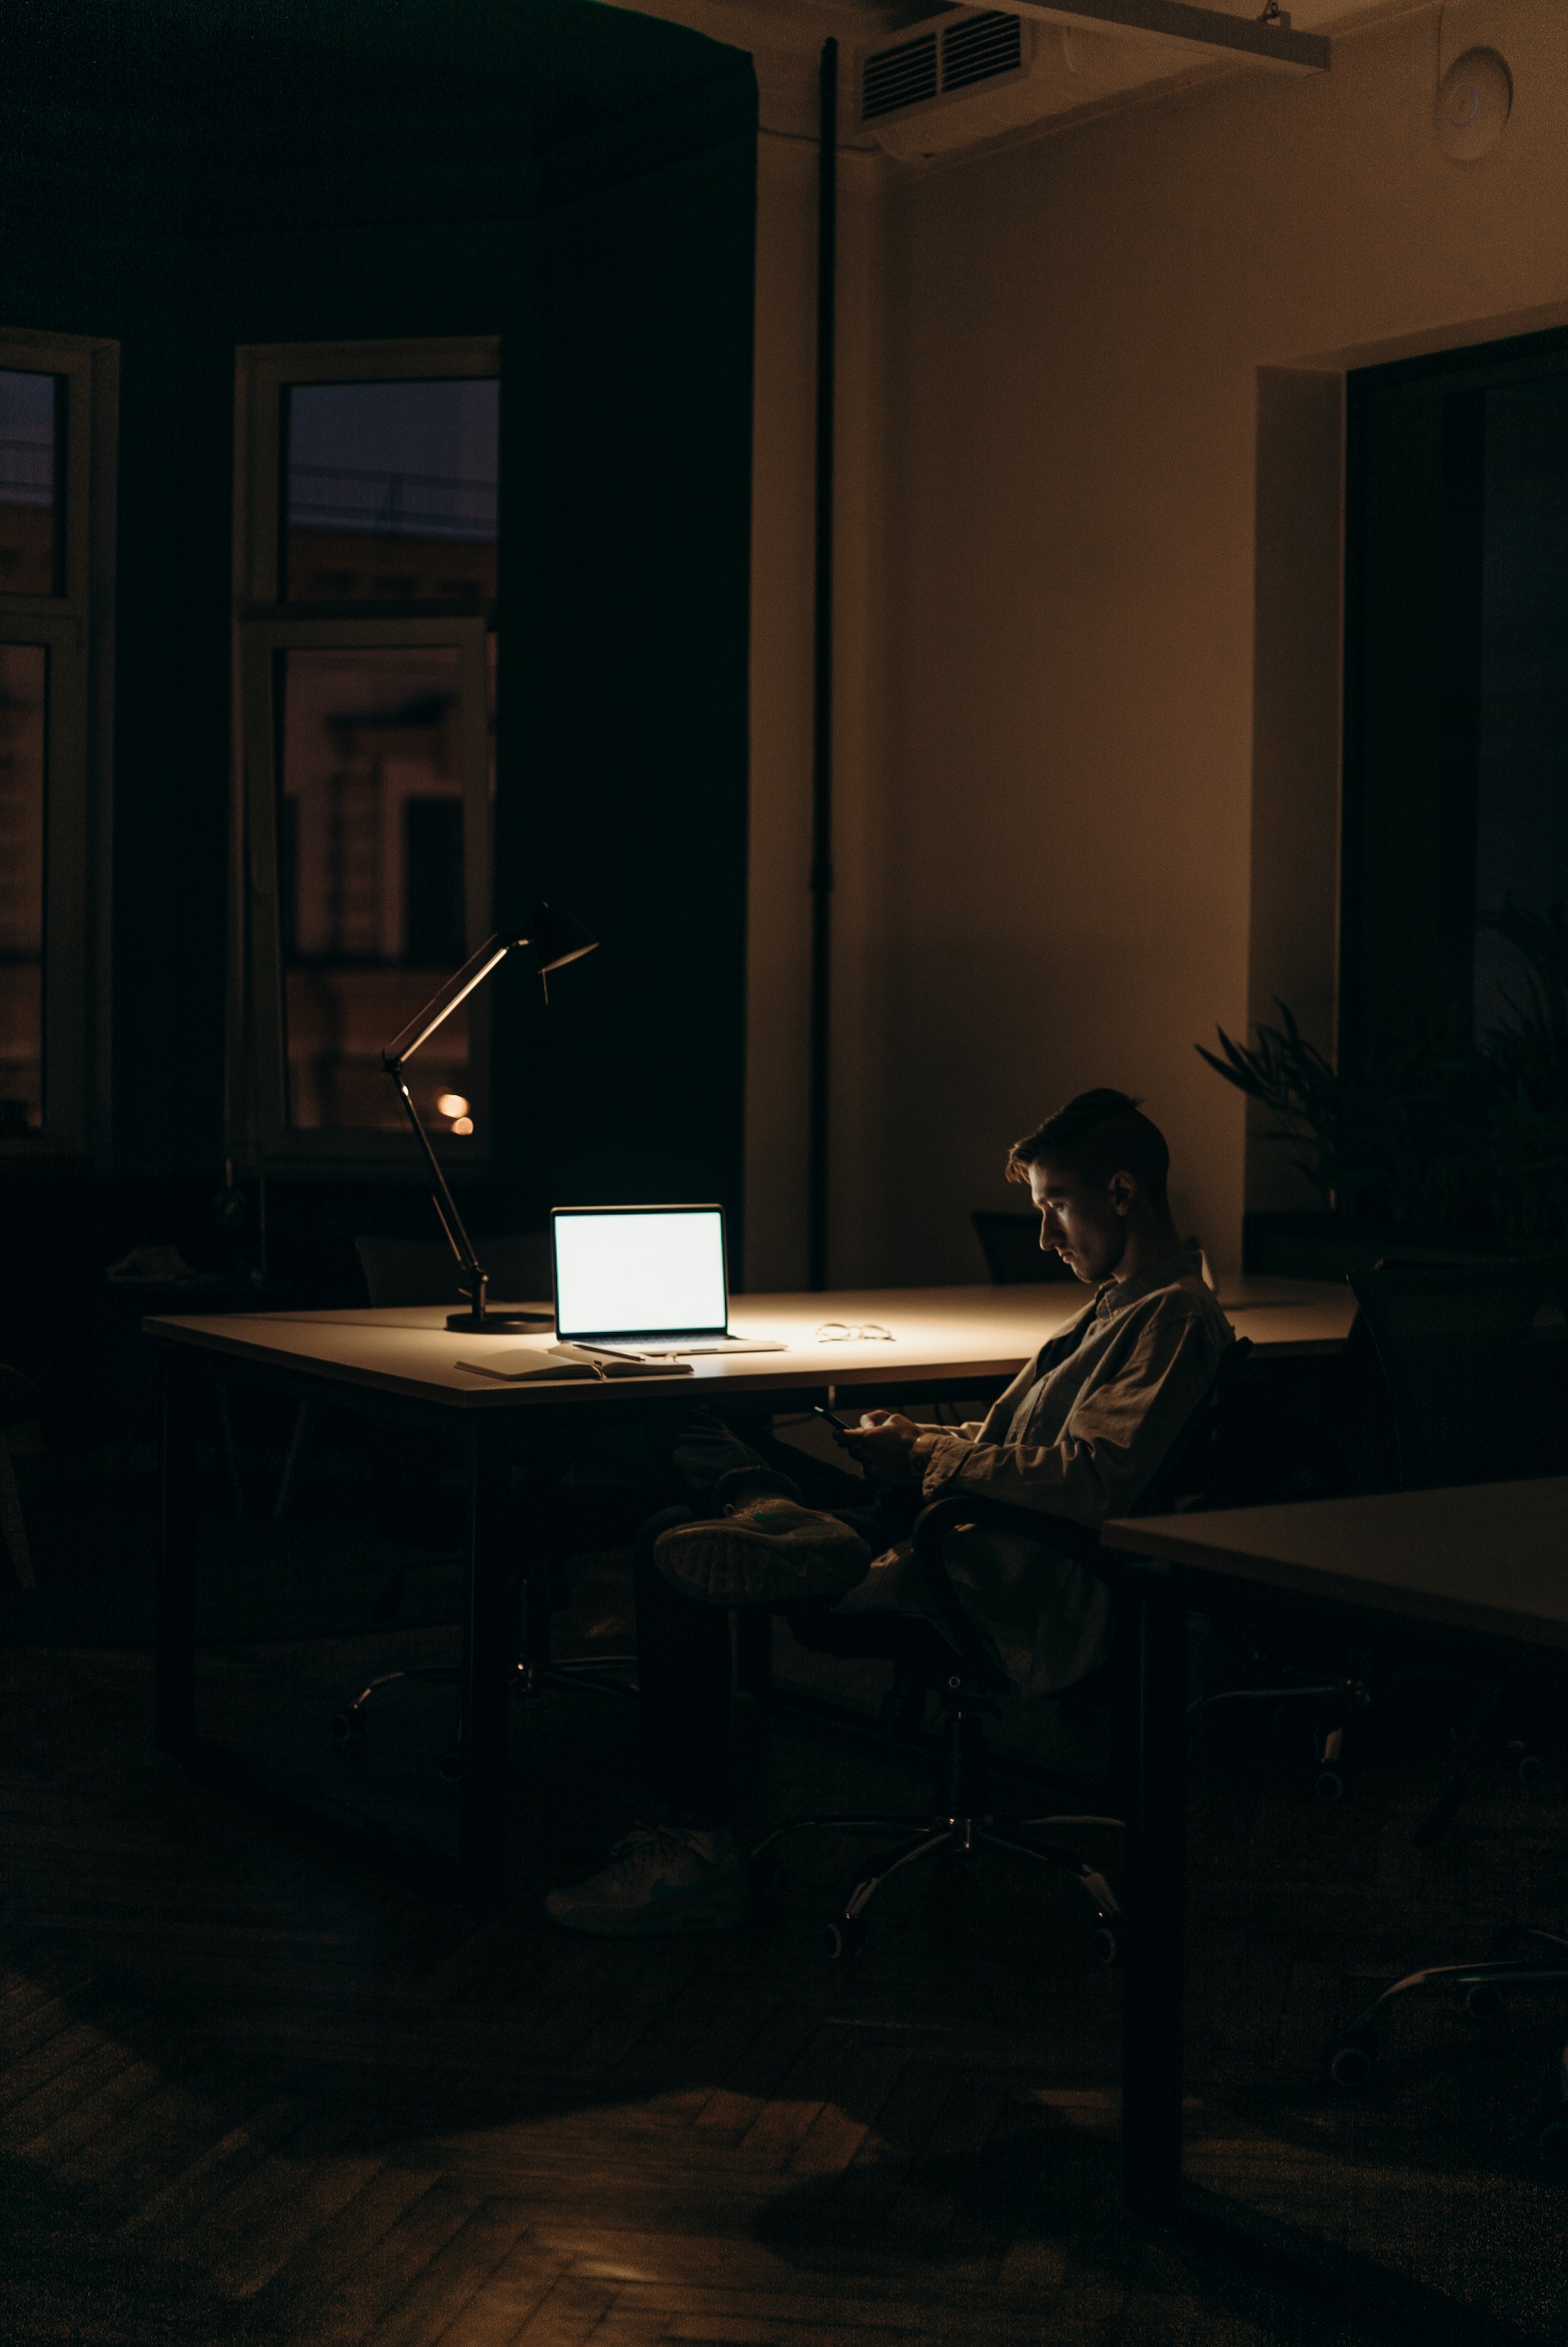 A man sitting in front of a laptop in a dark room | Source: Pexels